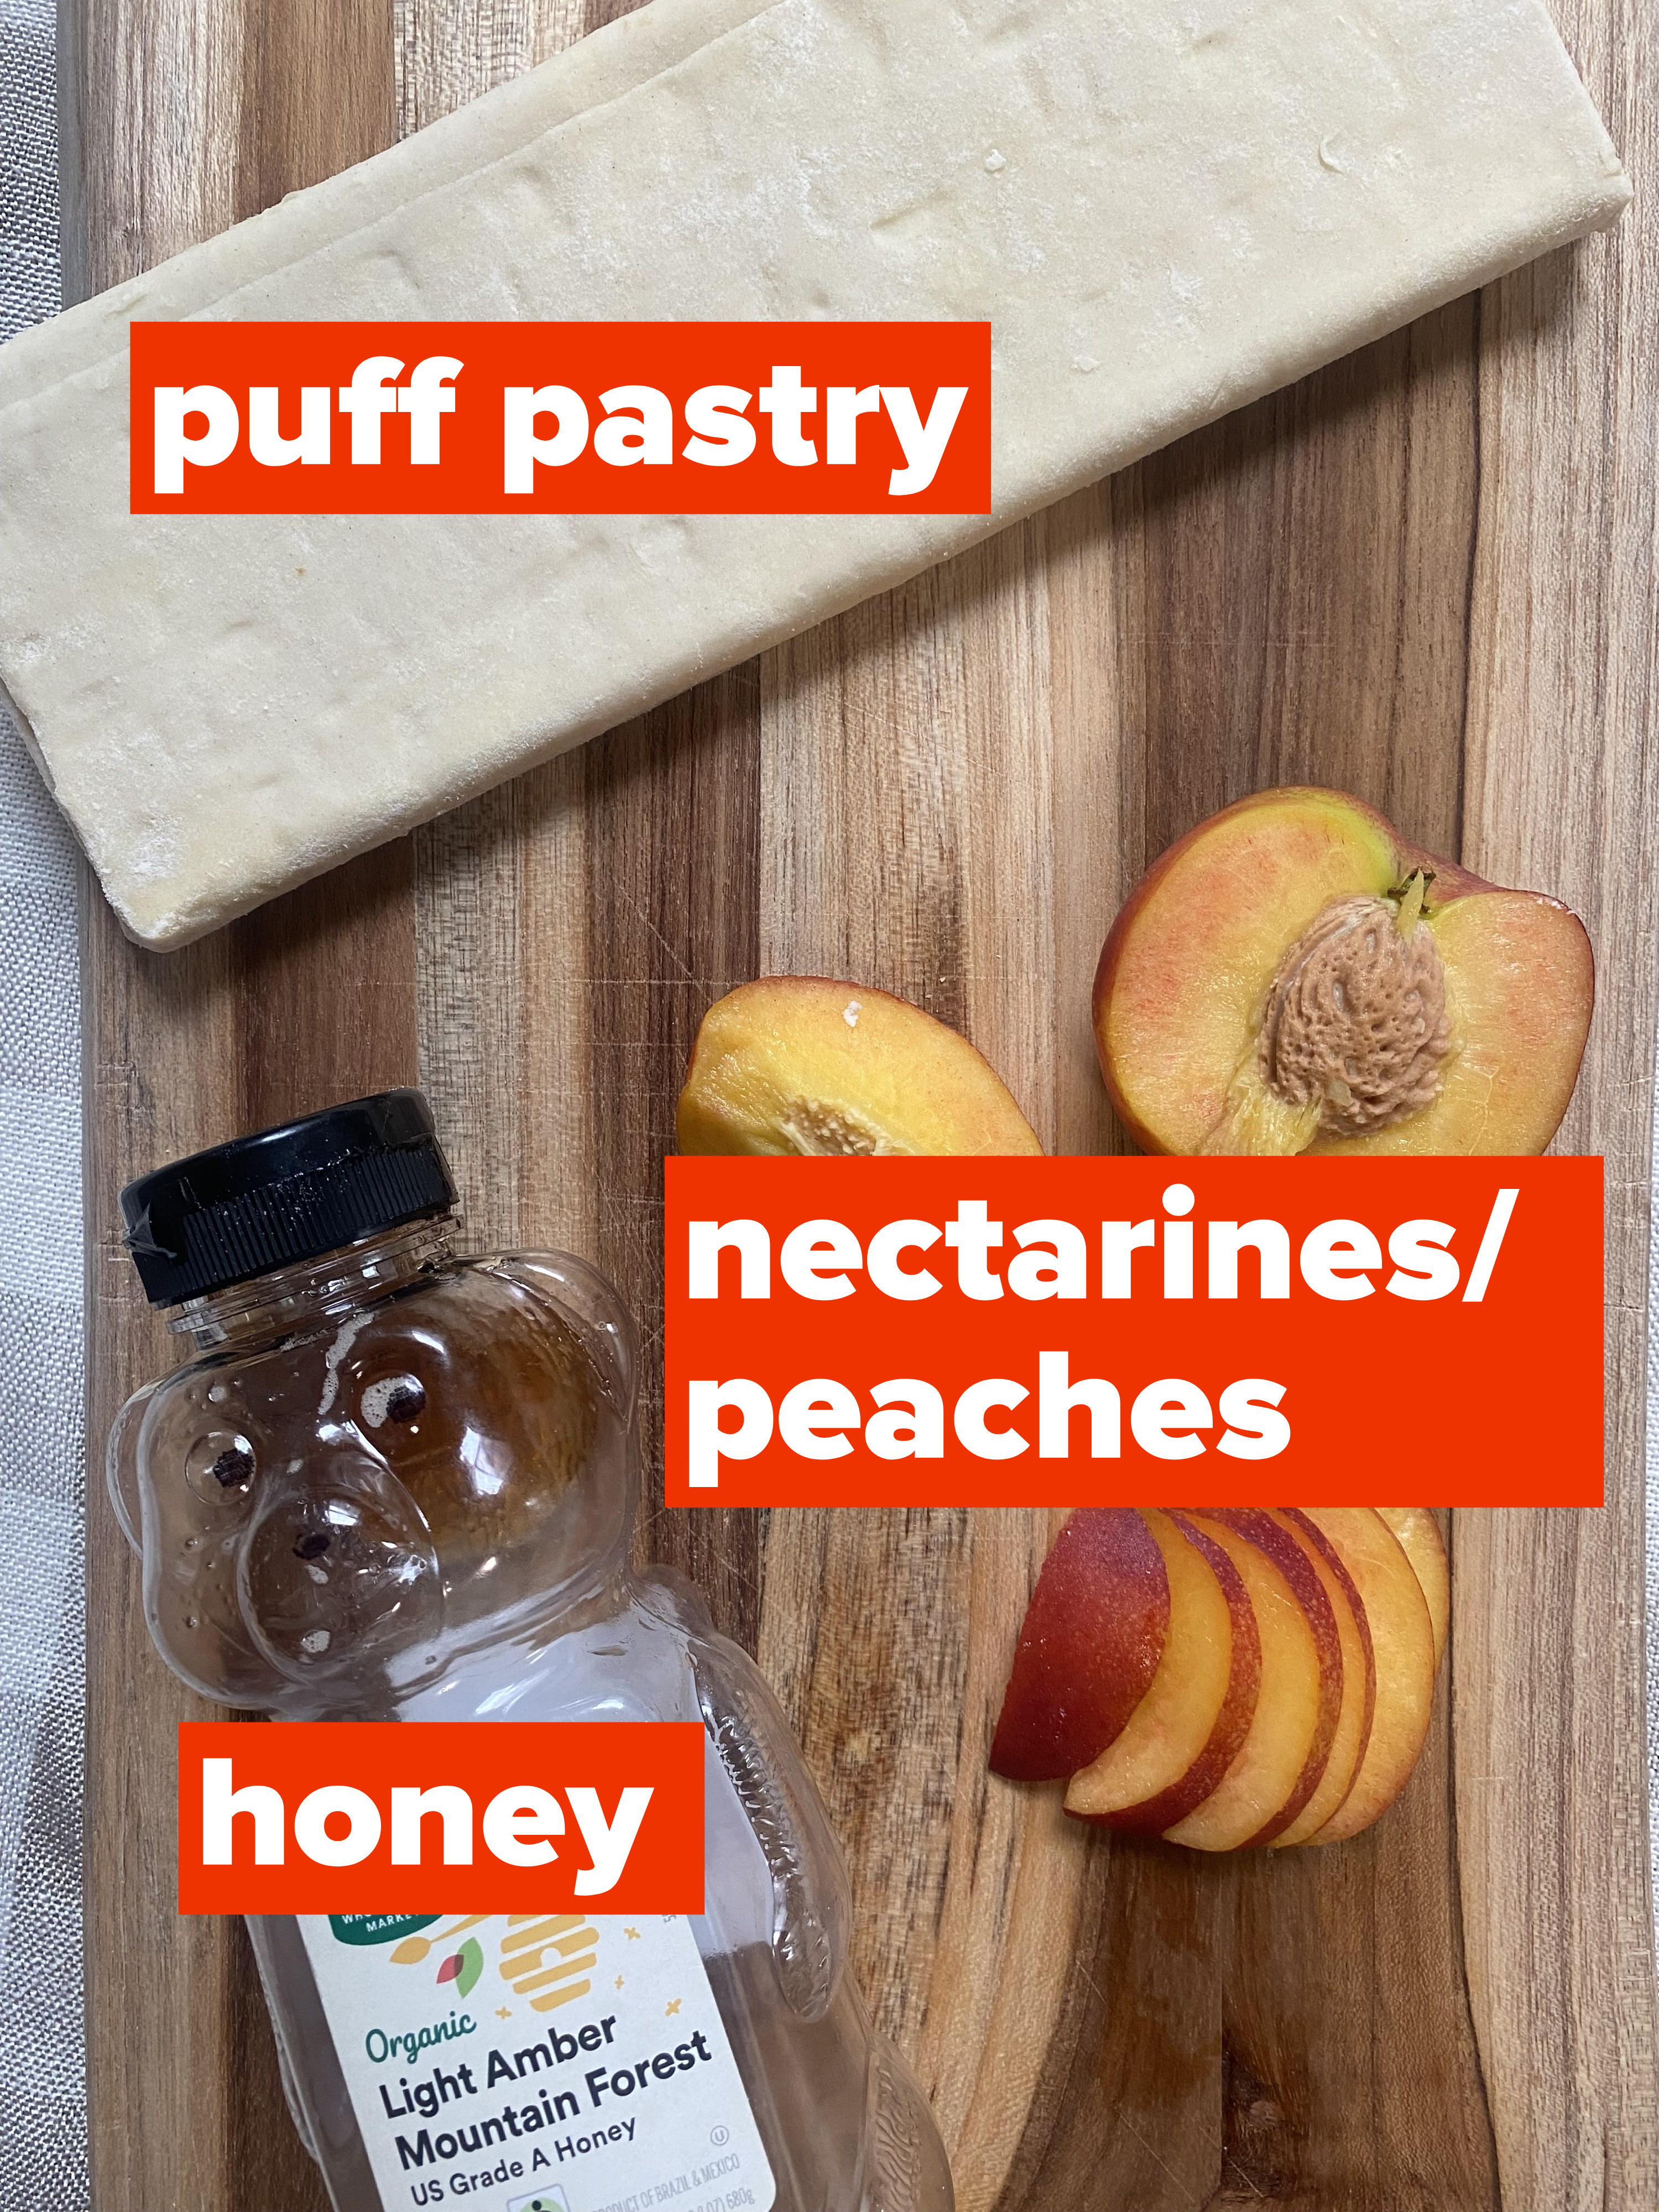 Puff pastry, peaches, and honey on a cutting board